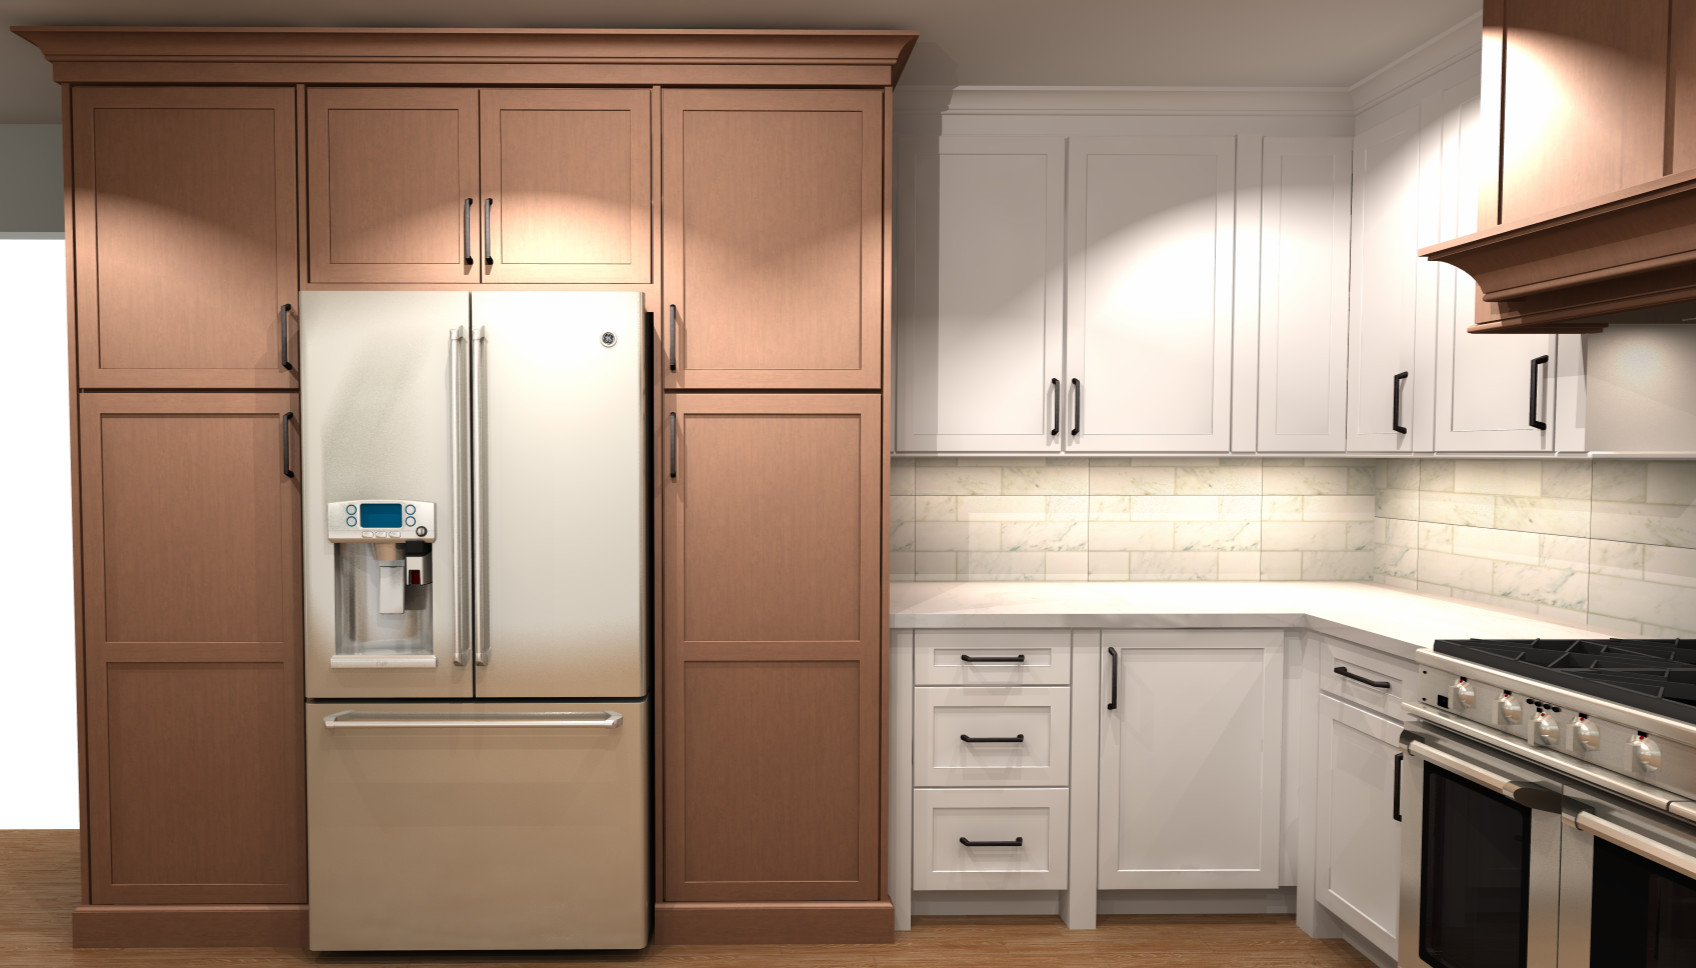 Concept Renderings of Kitchen Design for Baltimore Kitchen Remodel in the Homela